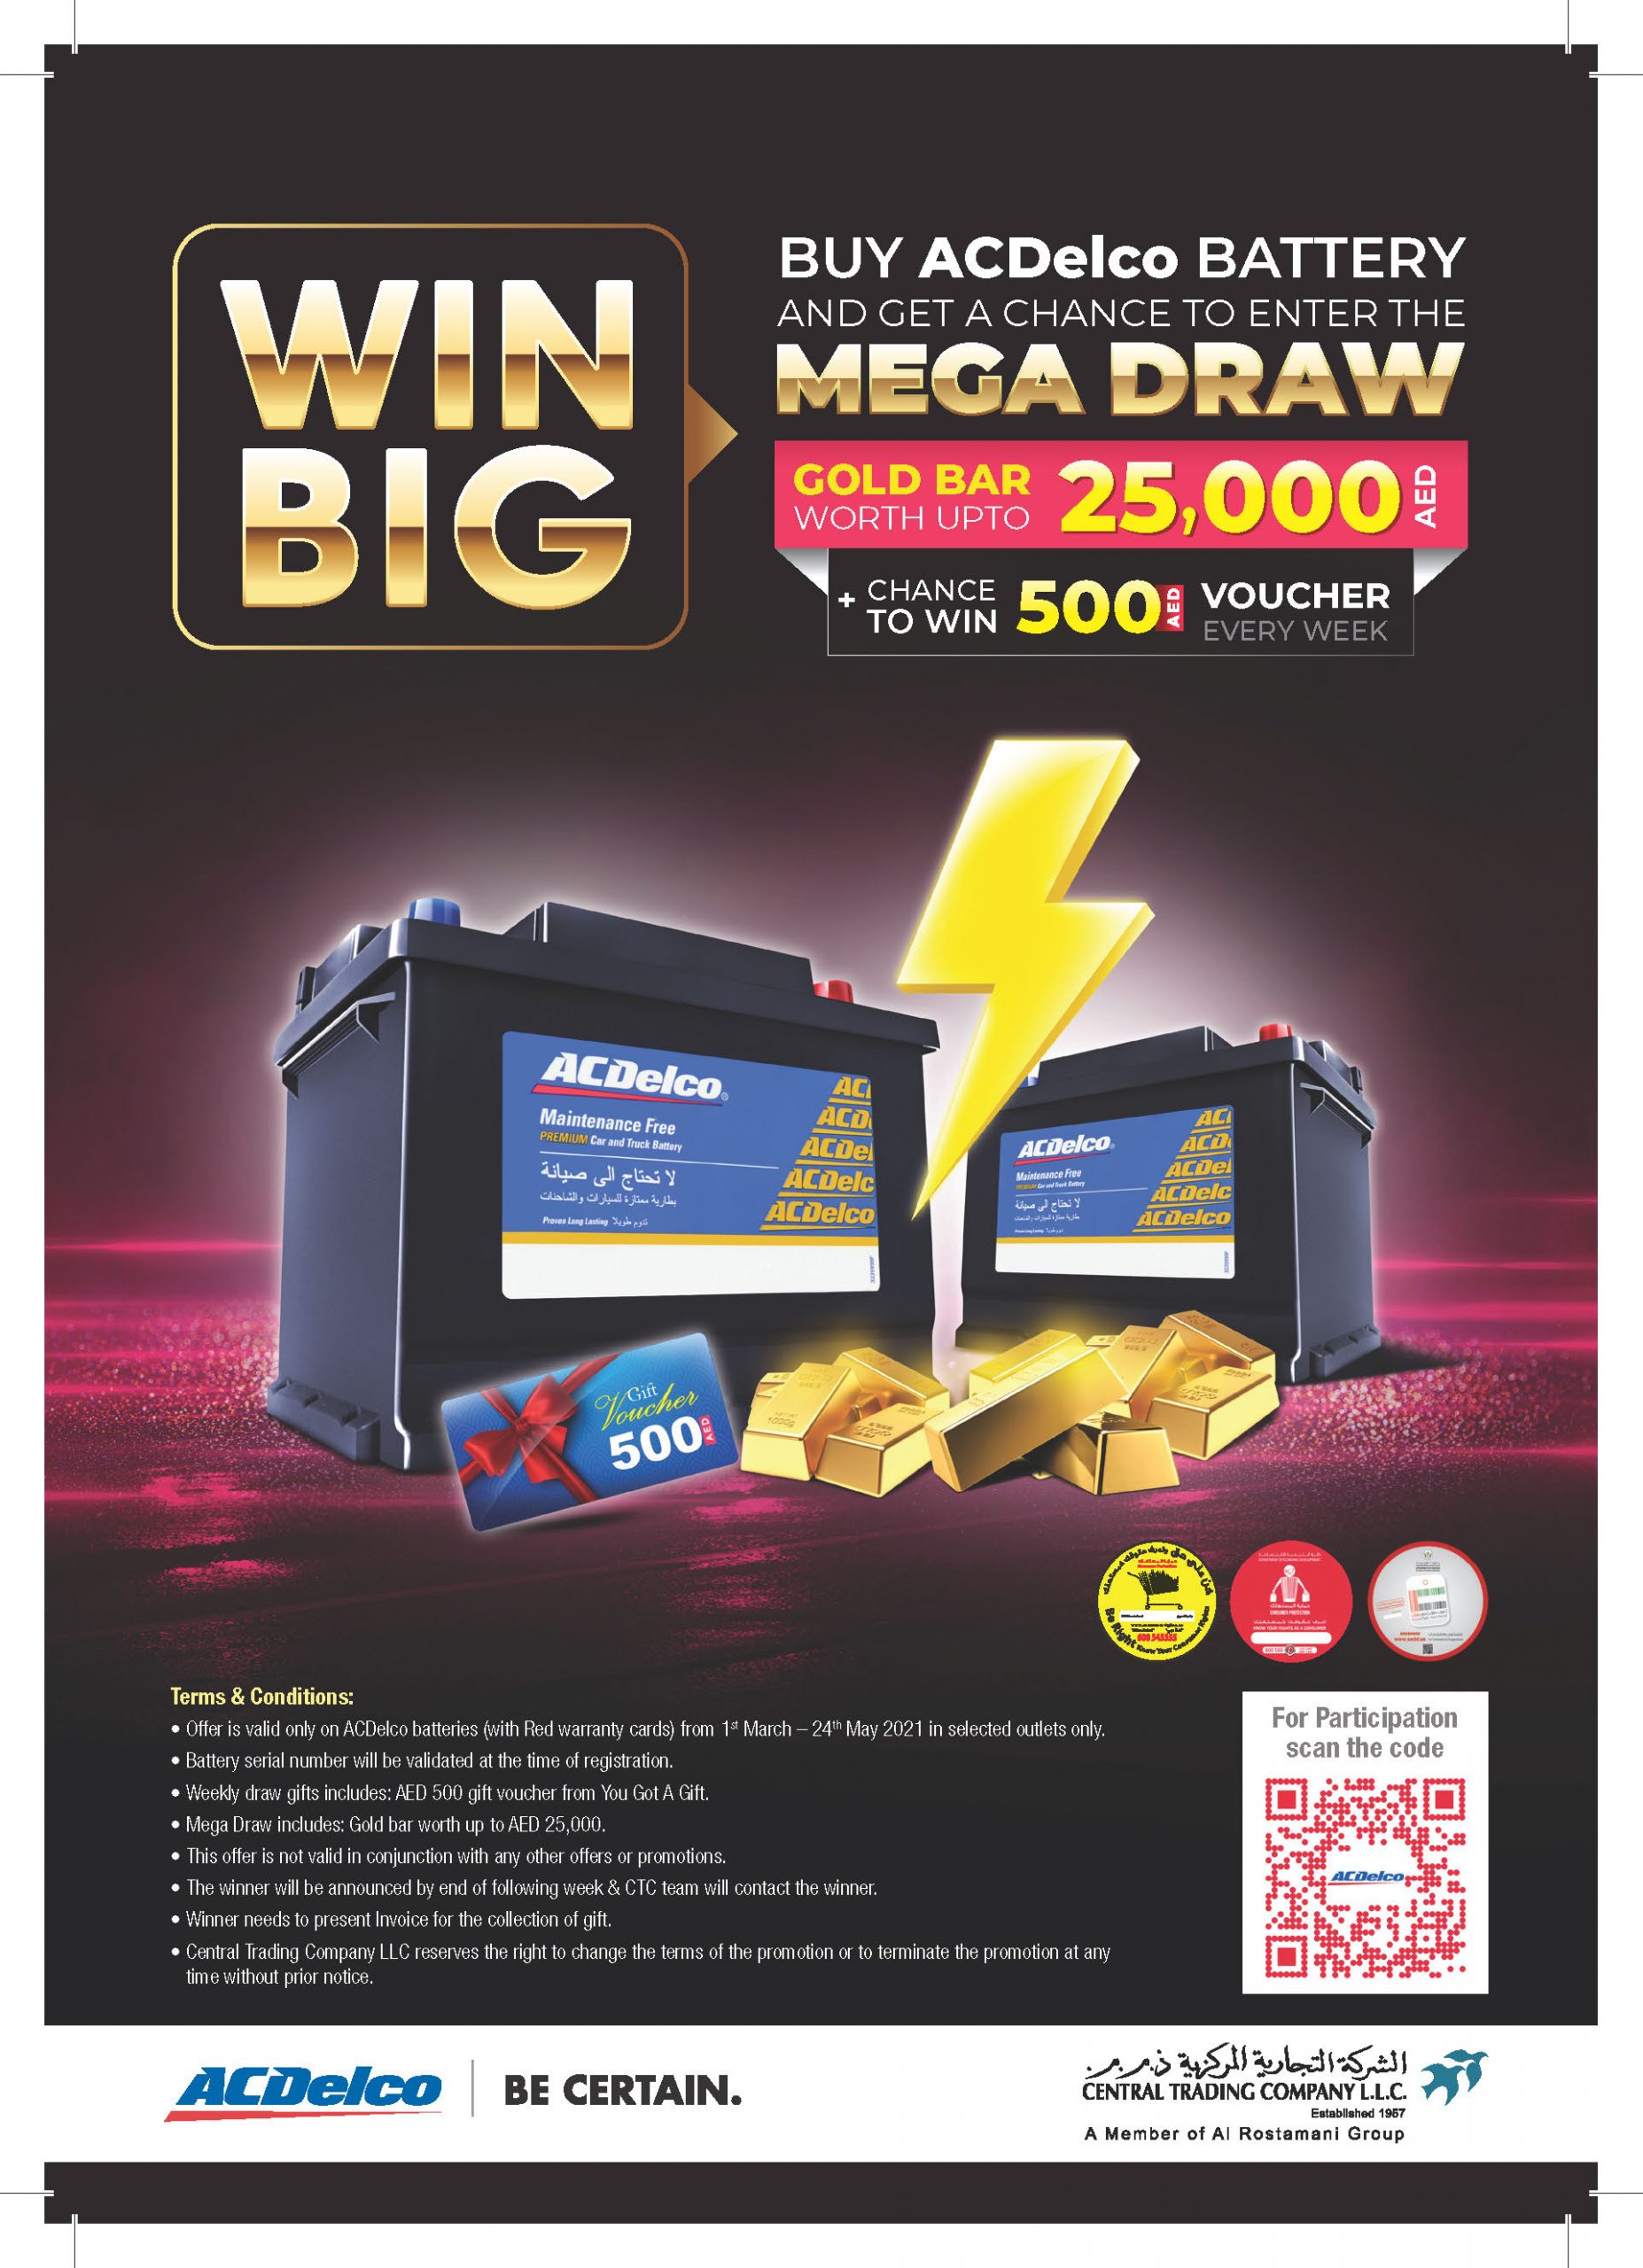 ACDelco Battery mega draw for gold bar